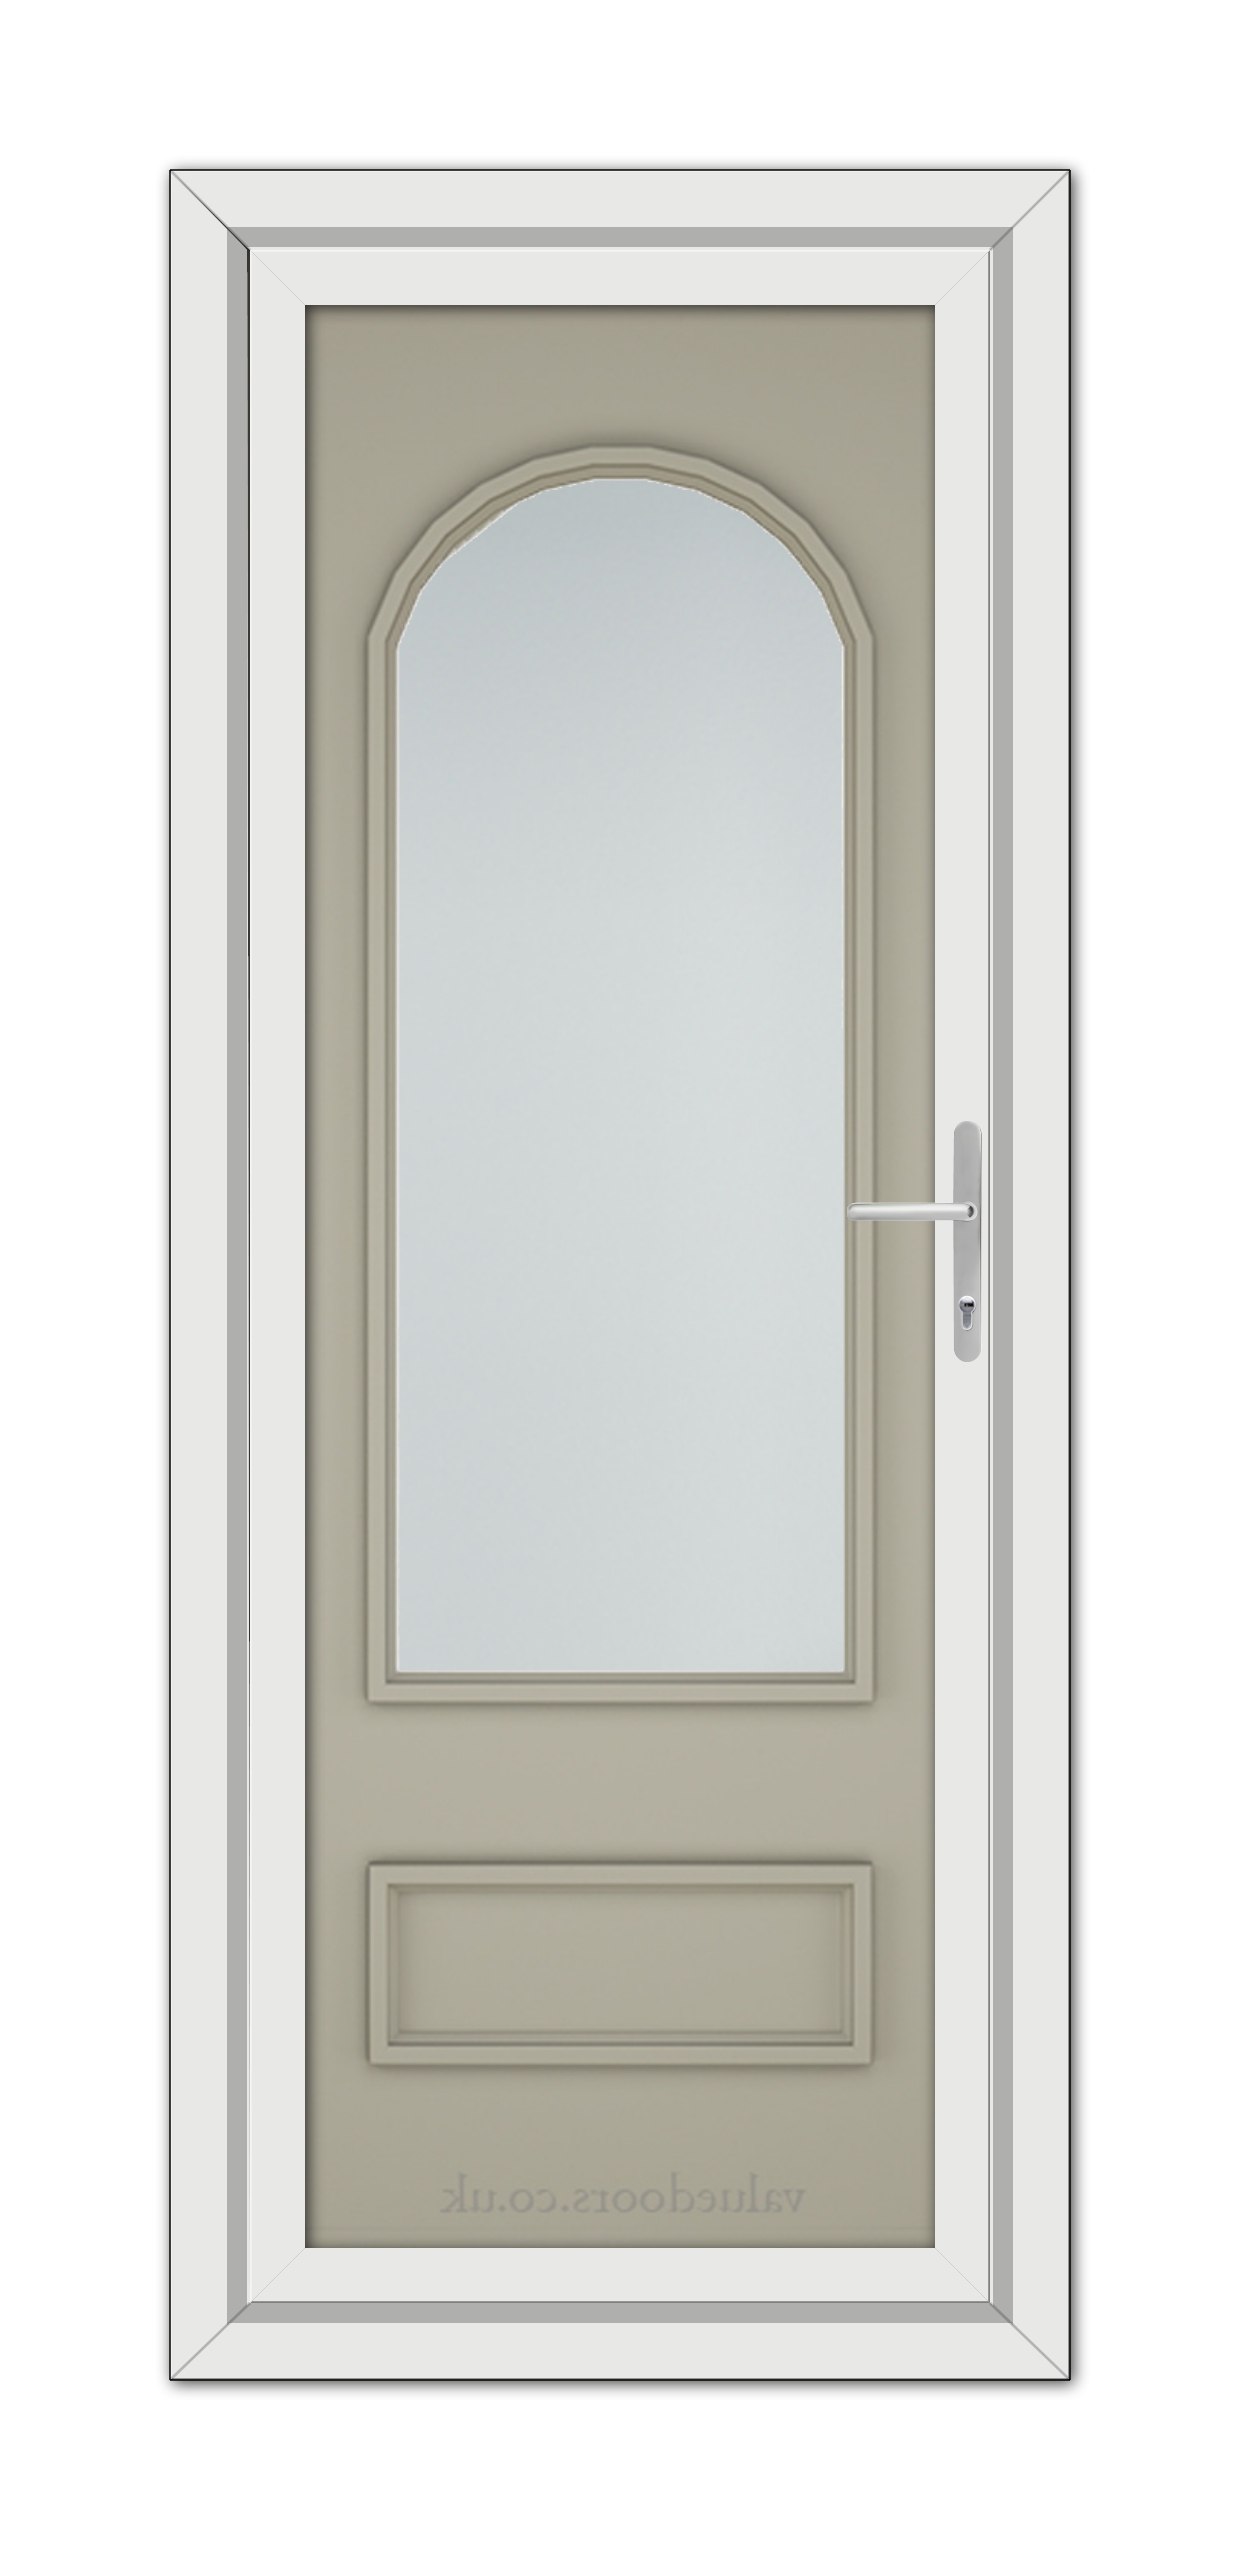 A modern beige Pebble Grey Canterbury uPVC Door with a reflective glass panel and a metal handle, framed within a white door frame.